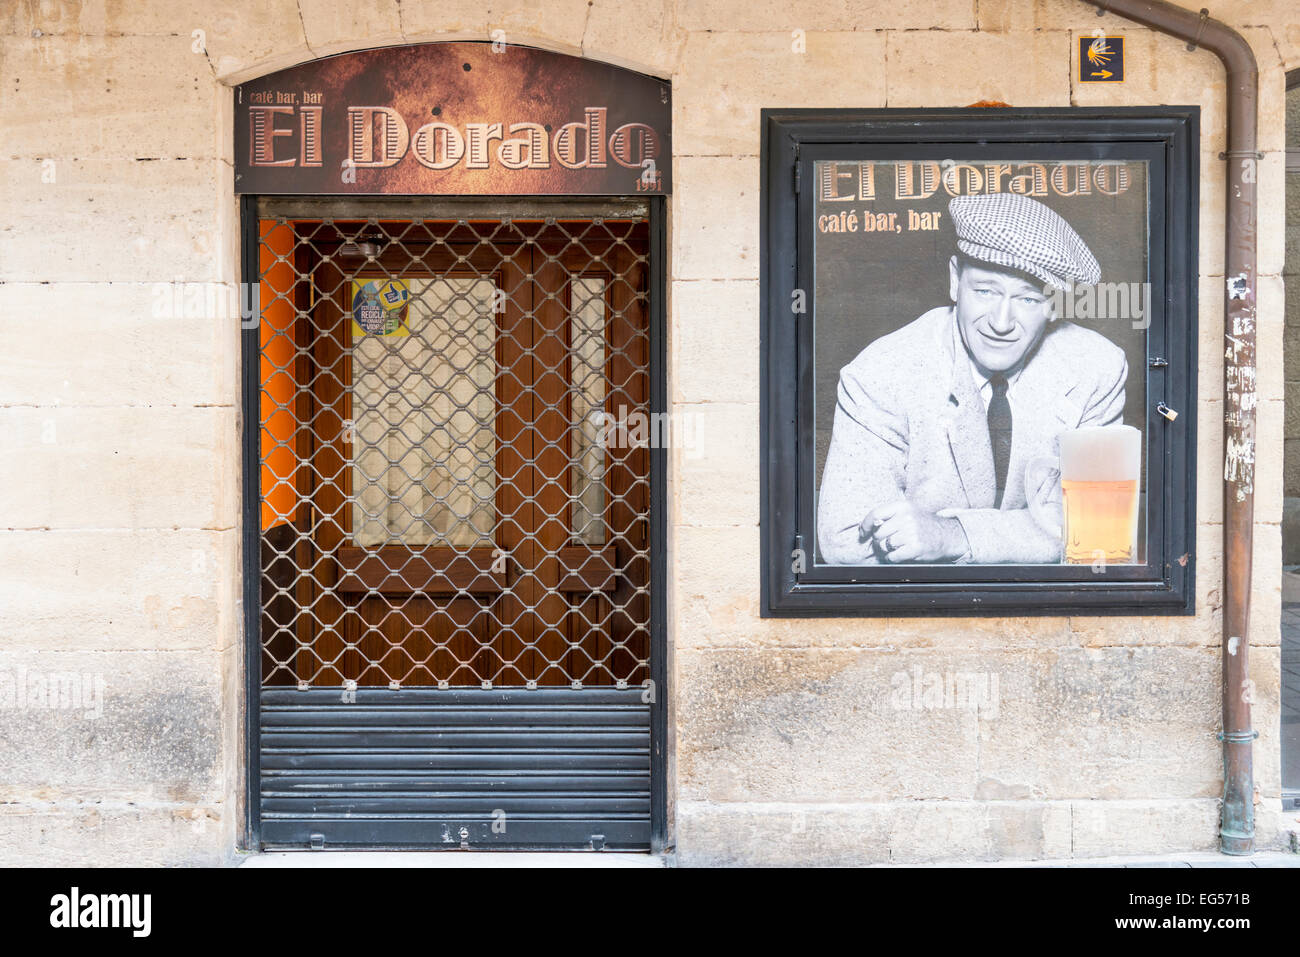 The El Dorado cafe and bar in Legrono Spain with a picture of John Wayne on the advertising poster on the wall outside Stock Photo